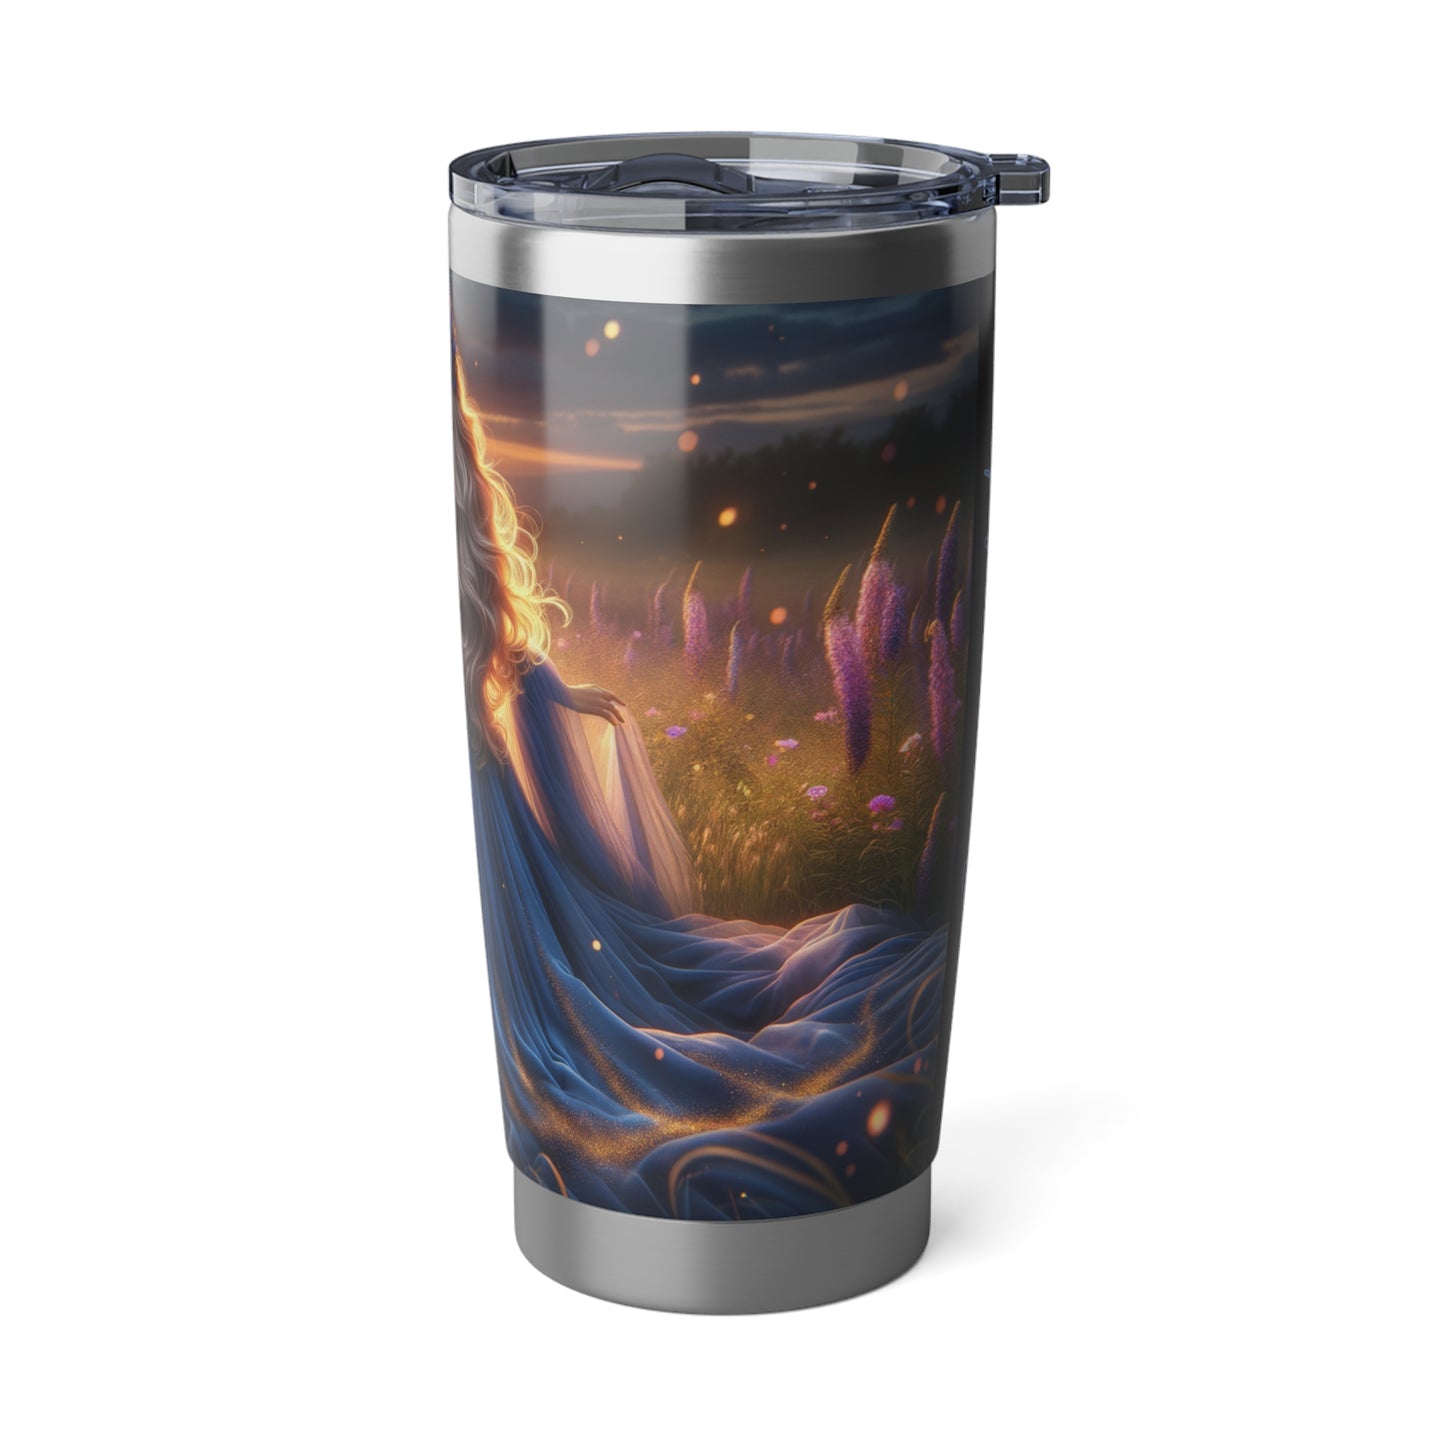 Once Upon A Fantasy - Blue Beauty 20oz Tumbler